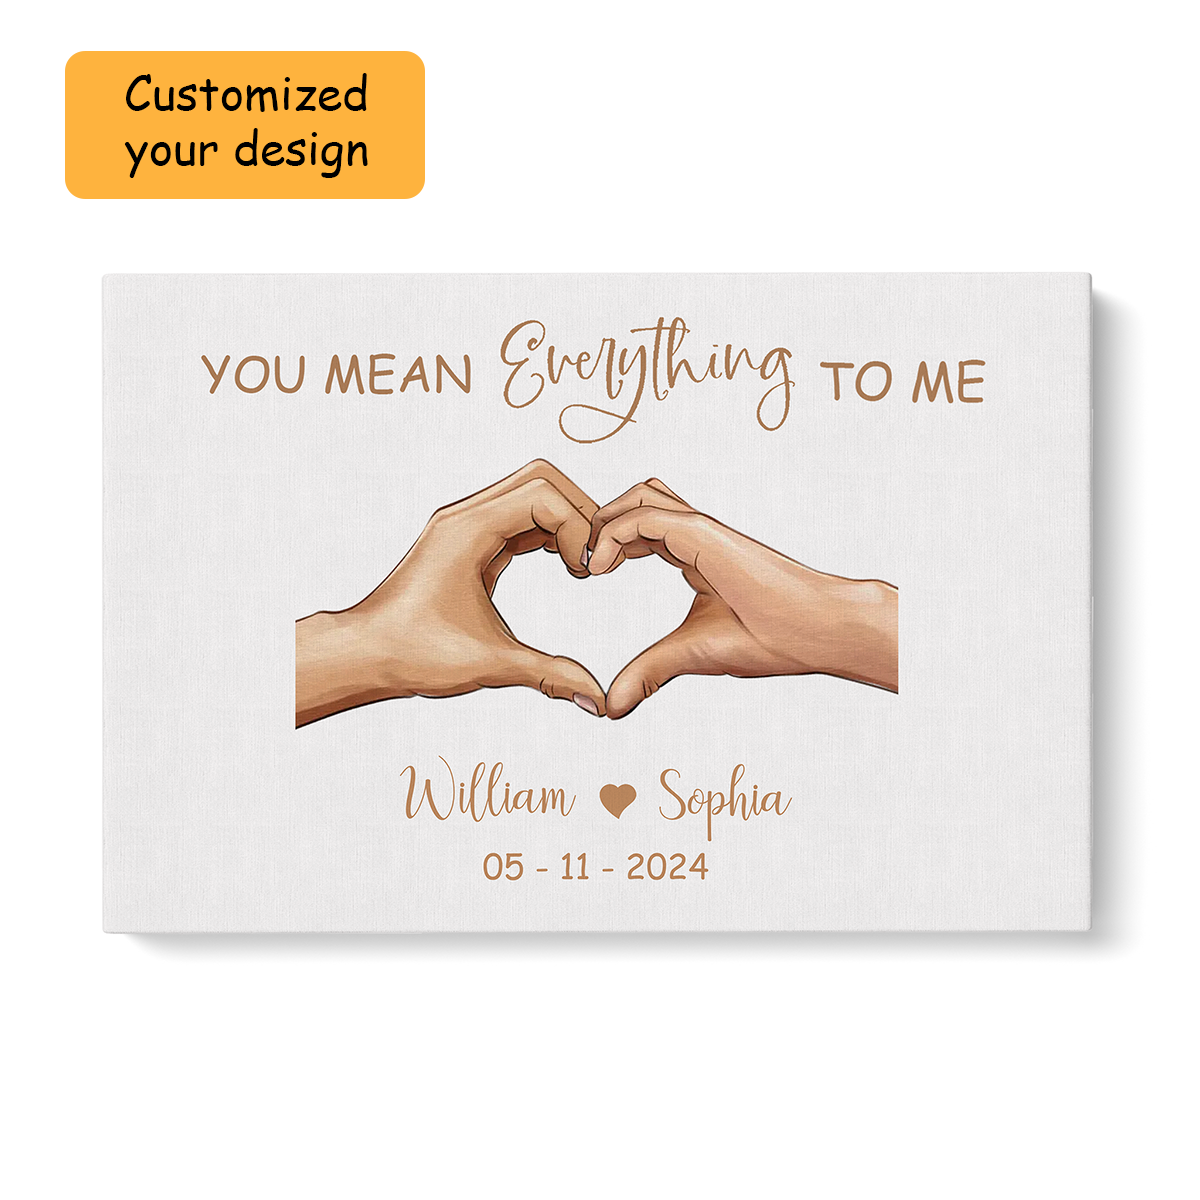 Personalized Couples Wedding Anniversary Wall Art Canvas, Holding Hands Love Sign You Mean Everything To Me Home Decor